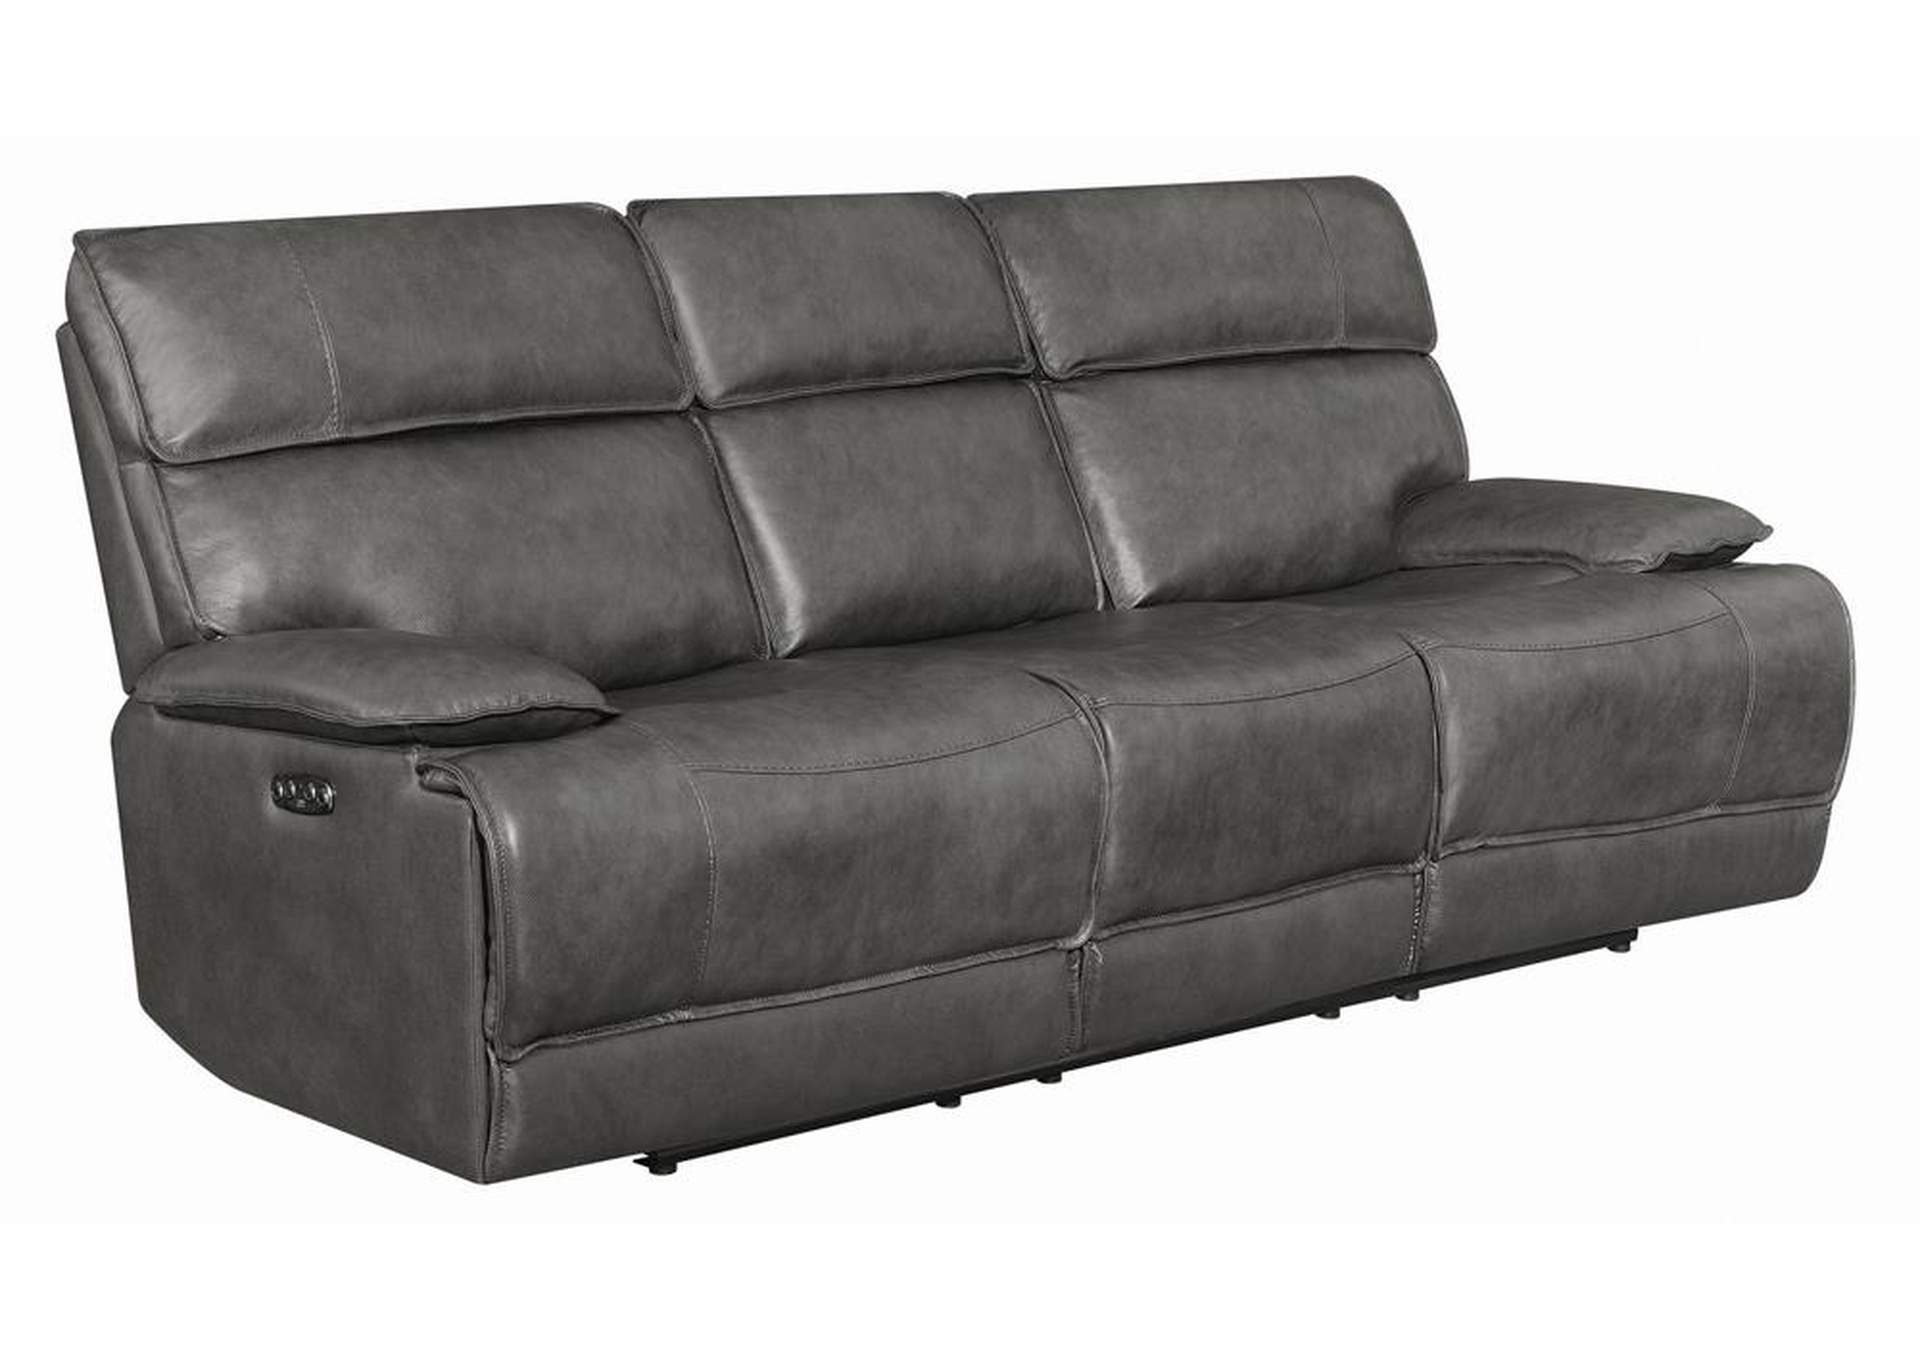 Chicago Standford Casual Charcoal Power Sofa,Coaster Furniture